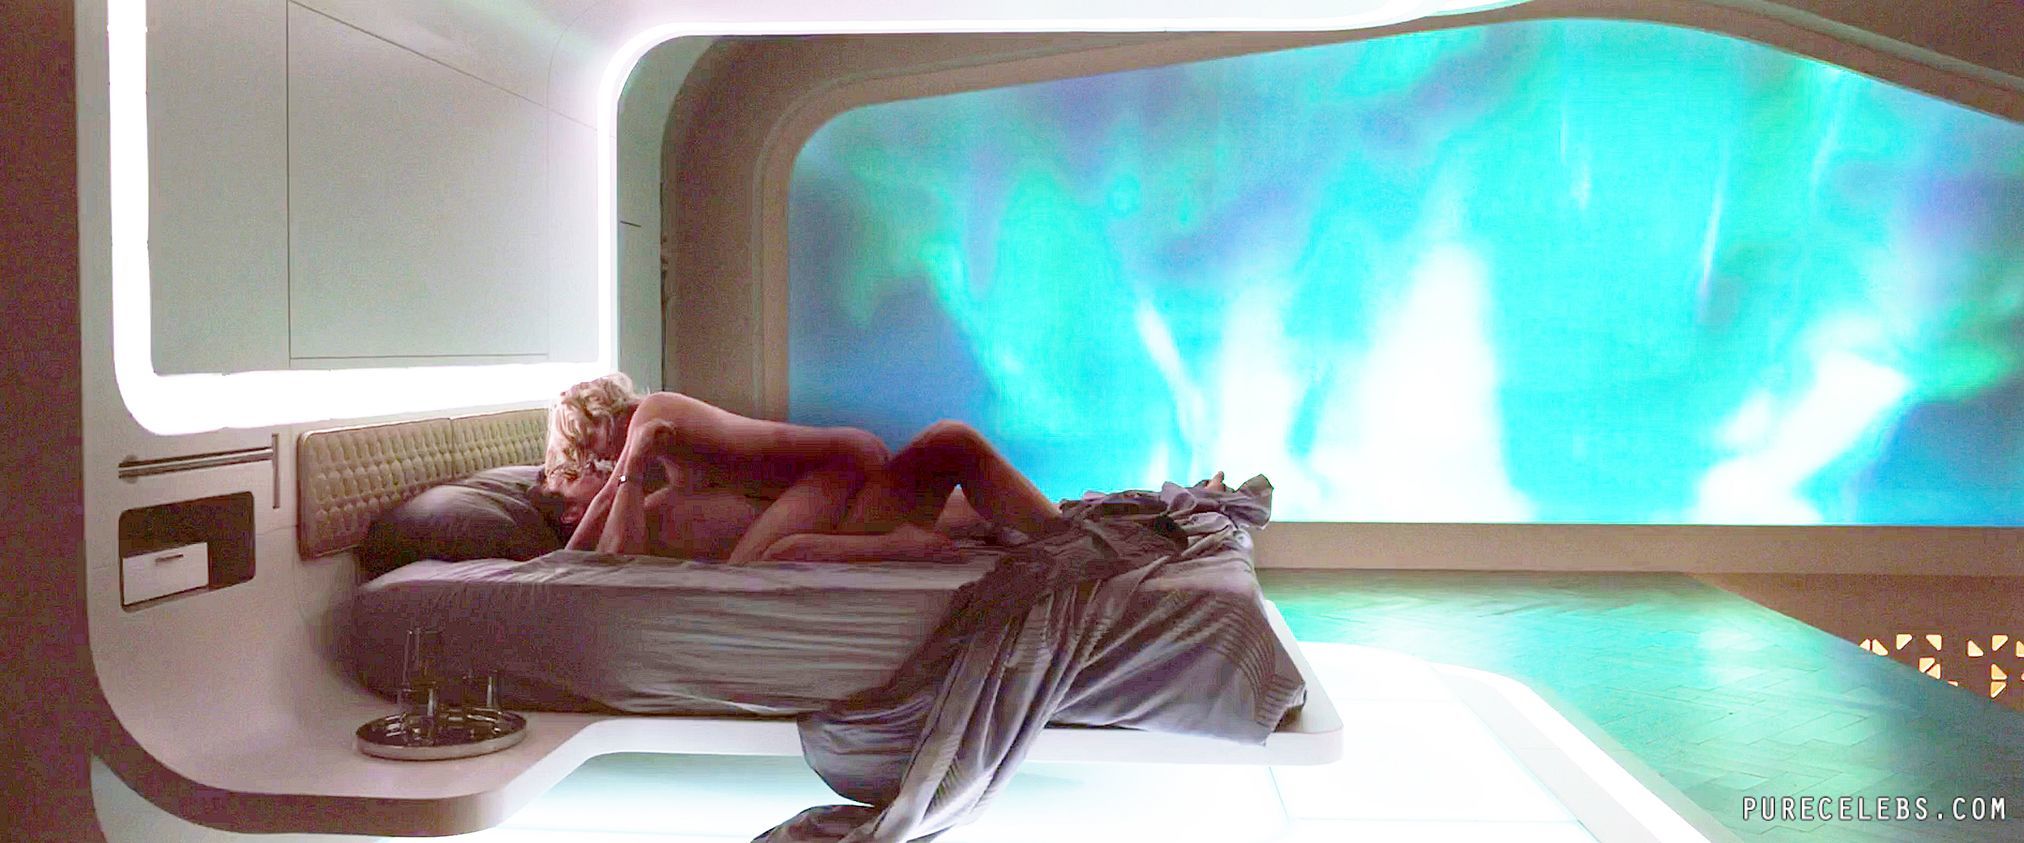 Jennifer Lawrence Nude Deleted Scenes From Passengers (2016) .